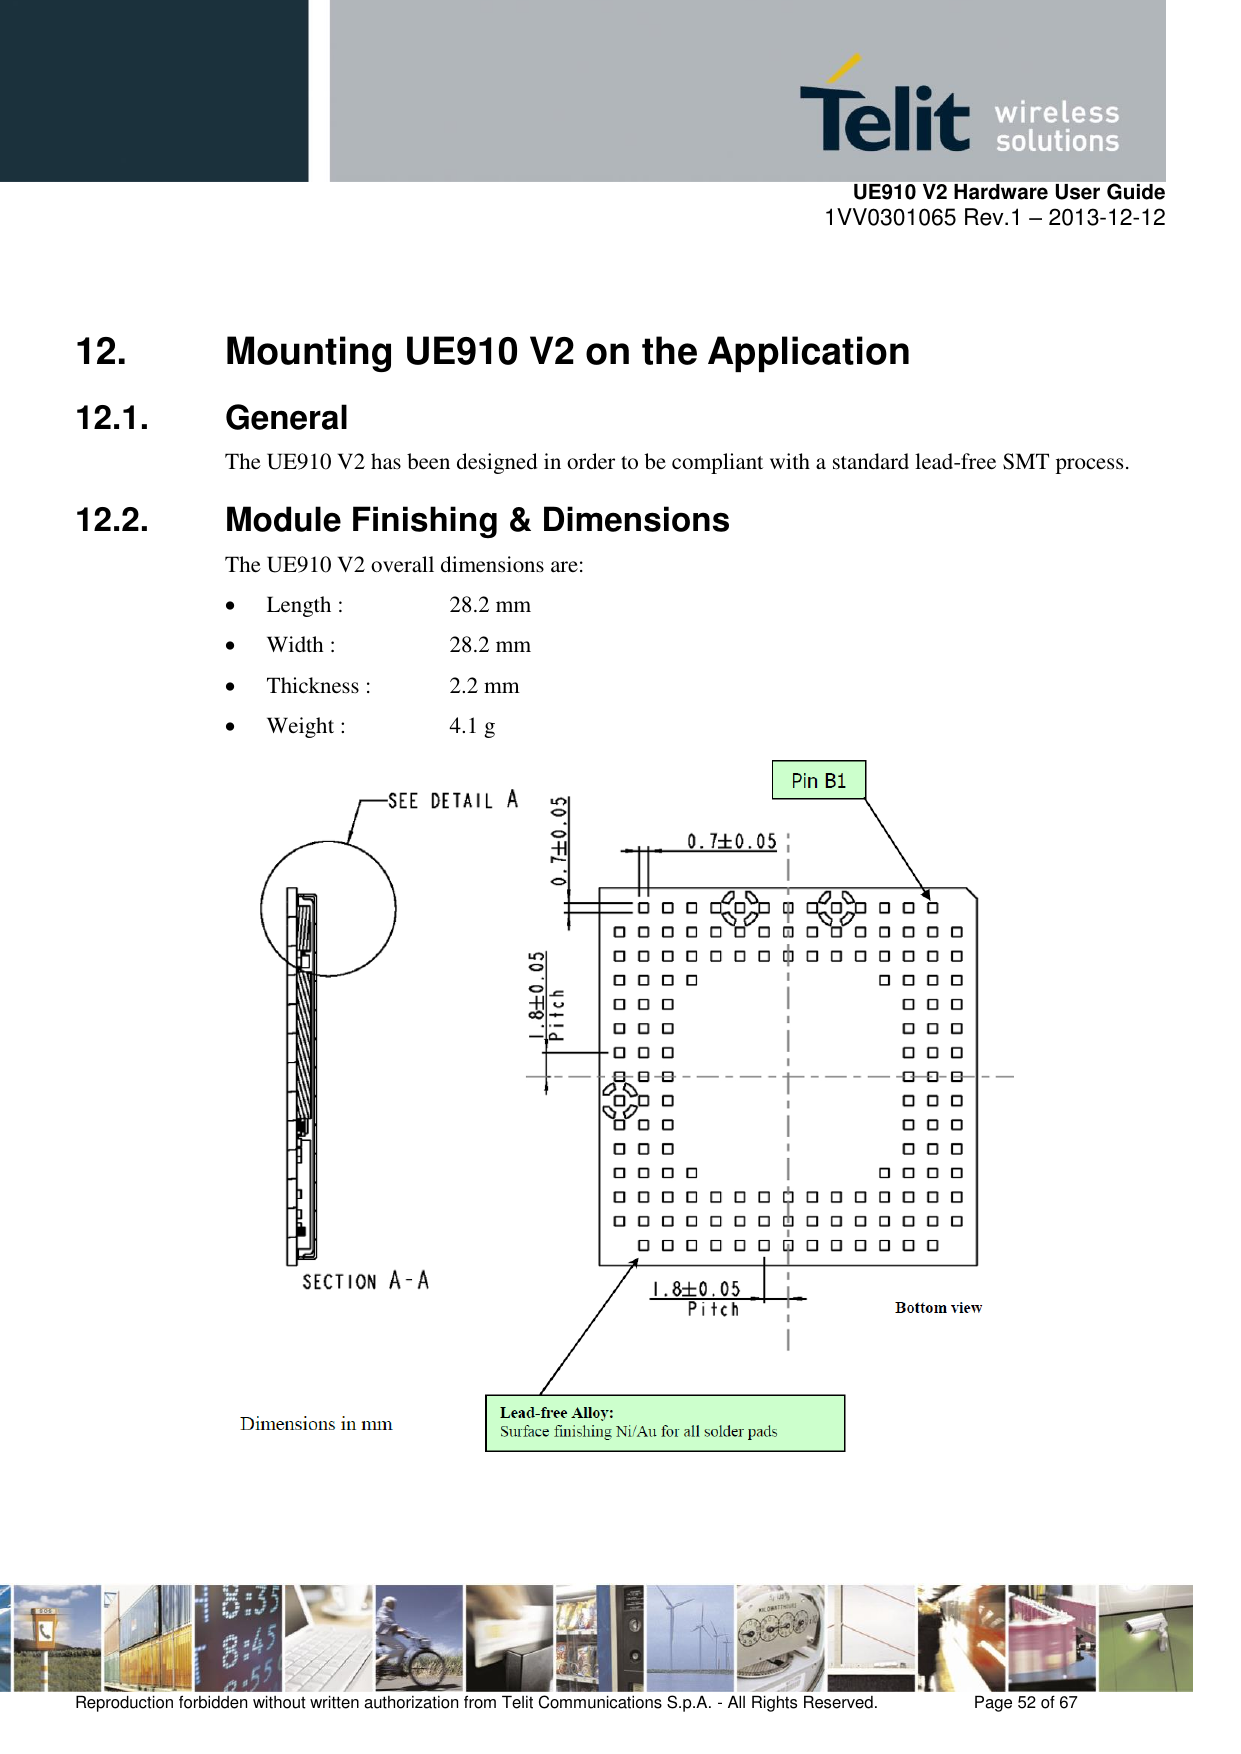     UE910 V2 Hardware User Guide 1VV0301065 Rev.1 – 2013-12-12  Reproduction forbidden without written authorization from Telit Communications S.p.A. - All Rights Reserved.    Page 52 of 67                                                     12.  Mounting UE910 V2 on the Application 12.1.  General The UE910 V2 has been designed in order to be compliant with a standard lead-free SMT process. 12.2.  Module Finishing &amp; Dimensions The UE910 V2 overall dimensions are:  Length :    28.2 mm  Width :    28.2 mm  Thickness :   2.2 mm  Weight :    4.1 g    